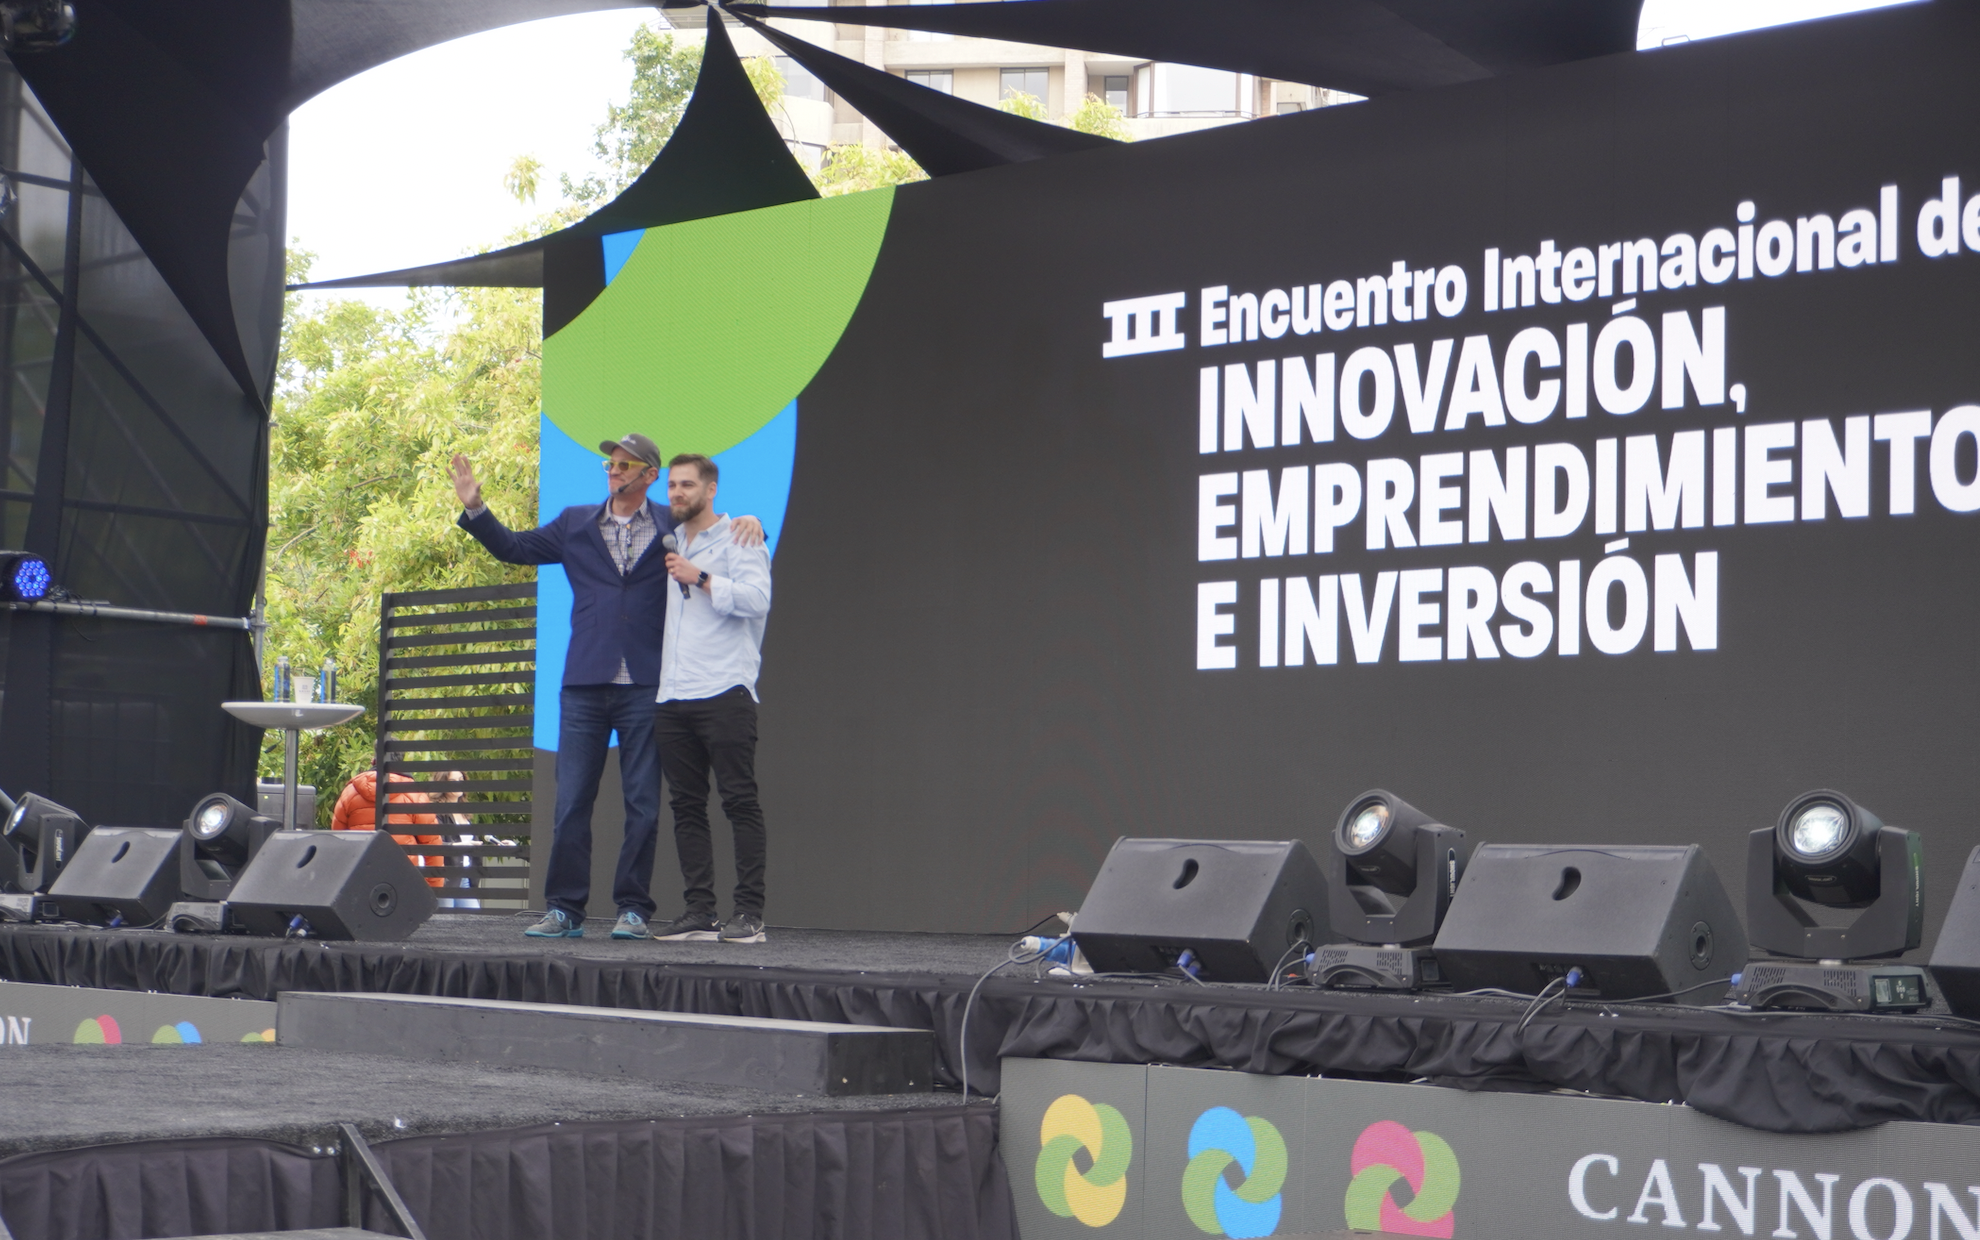 David Albo alongside Adeo Ressi, founder of Founder Institute and VC Lab, on the main stage of ETM 2023.